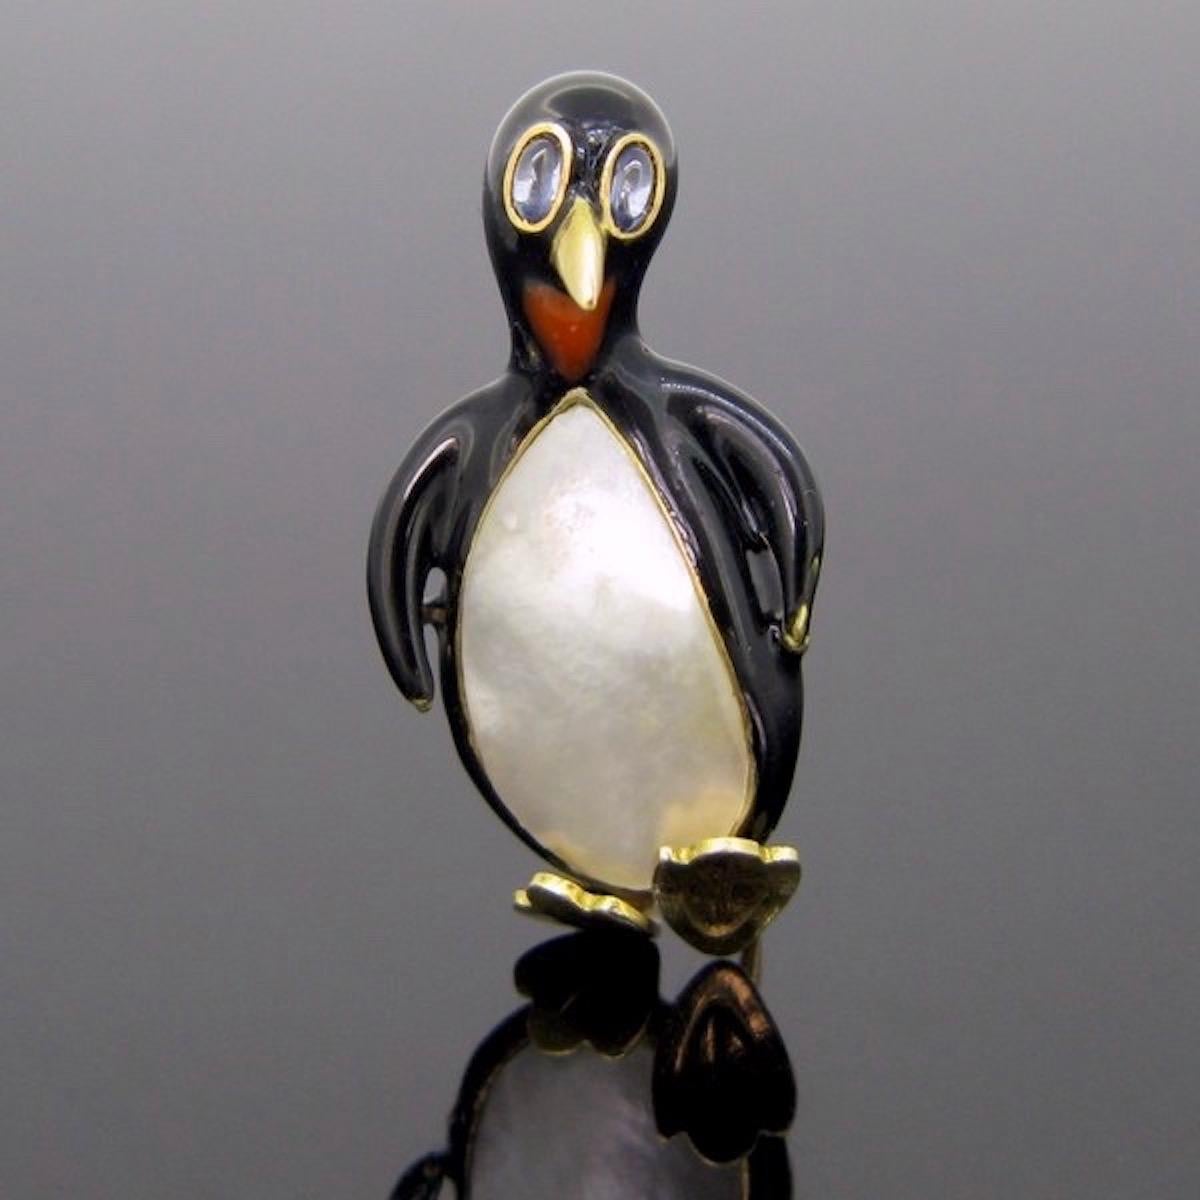 This brooch features a classy penguin made in 18kt gold, mother of pearl and painted in black and red enamel. The eyes are made with 2 cabochon cut sapphires. It is in very good condition. This pin brooch could be wear everyday, it is a funny and